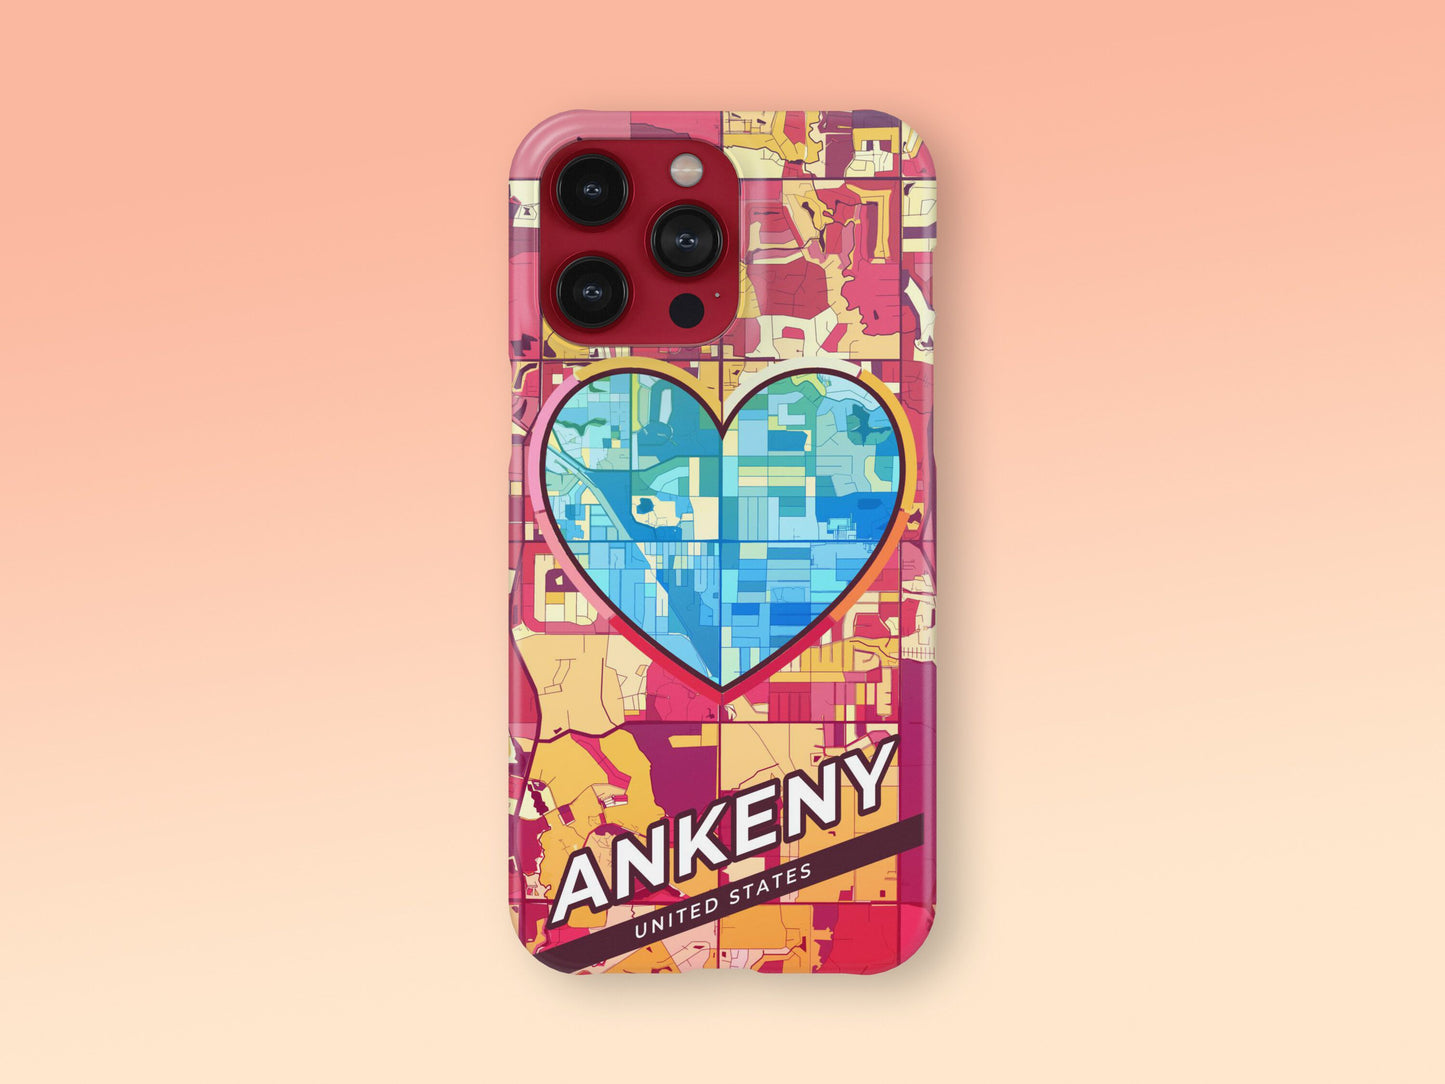 Ankeny Iowa slim phone case with colorful icon. Birthday, wedding or housewarming gift. Couple match cases. 2